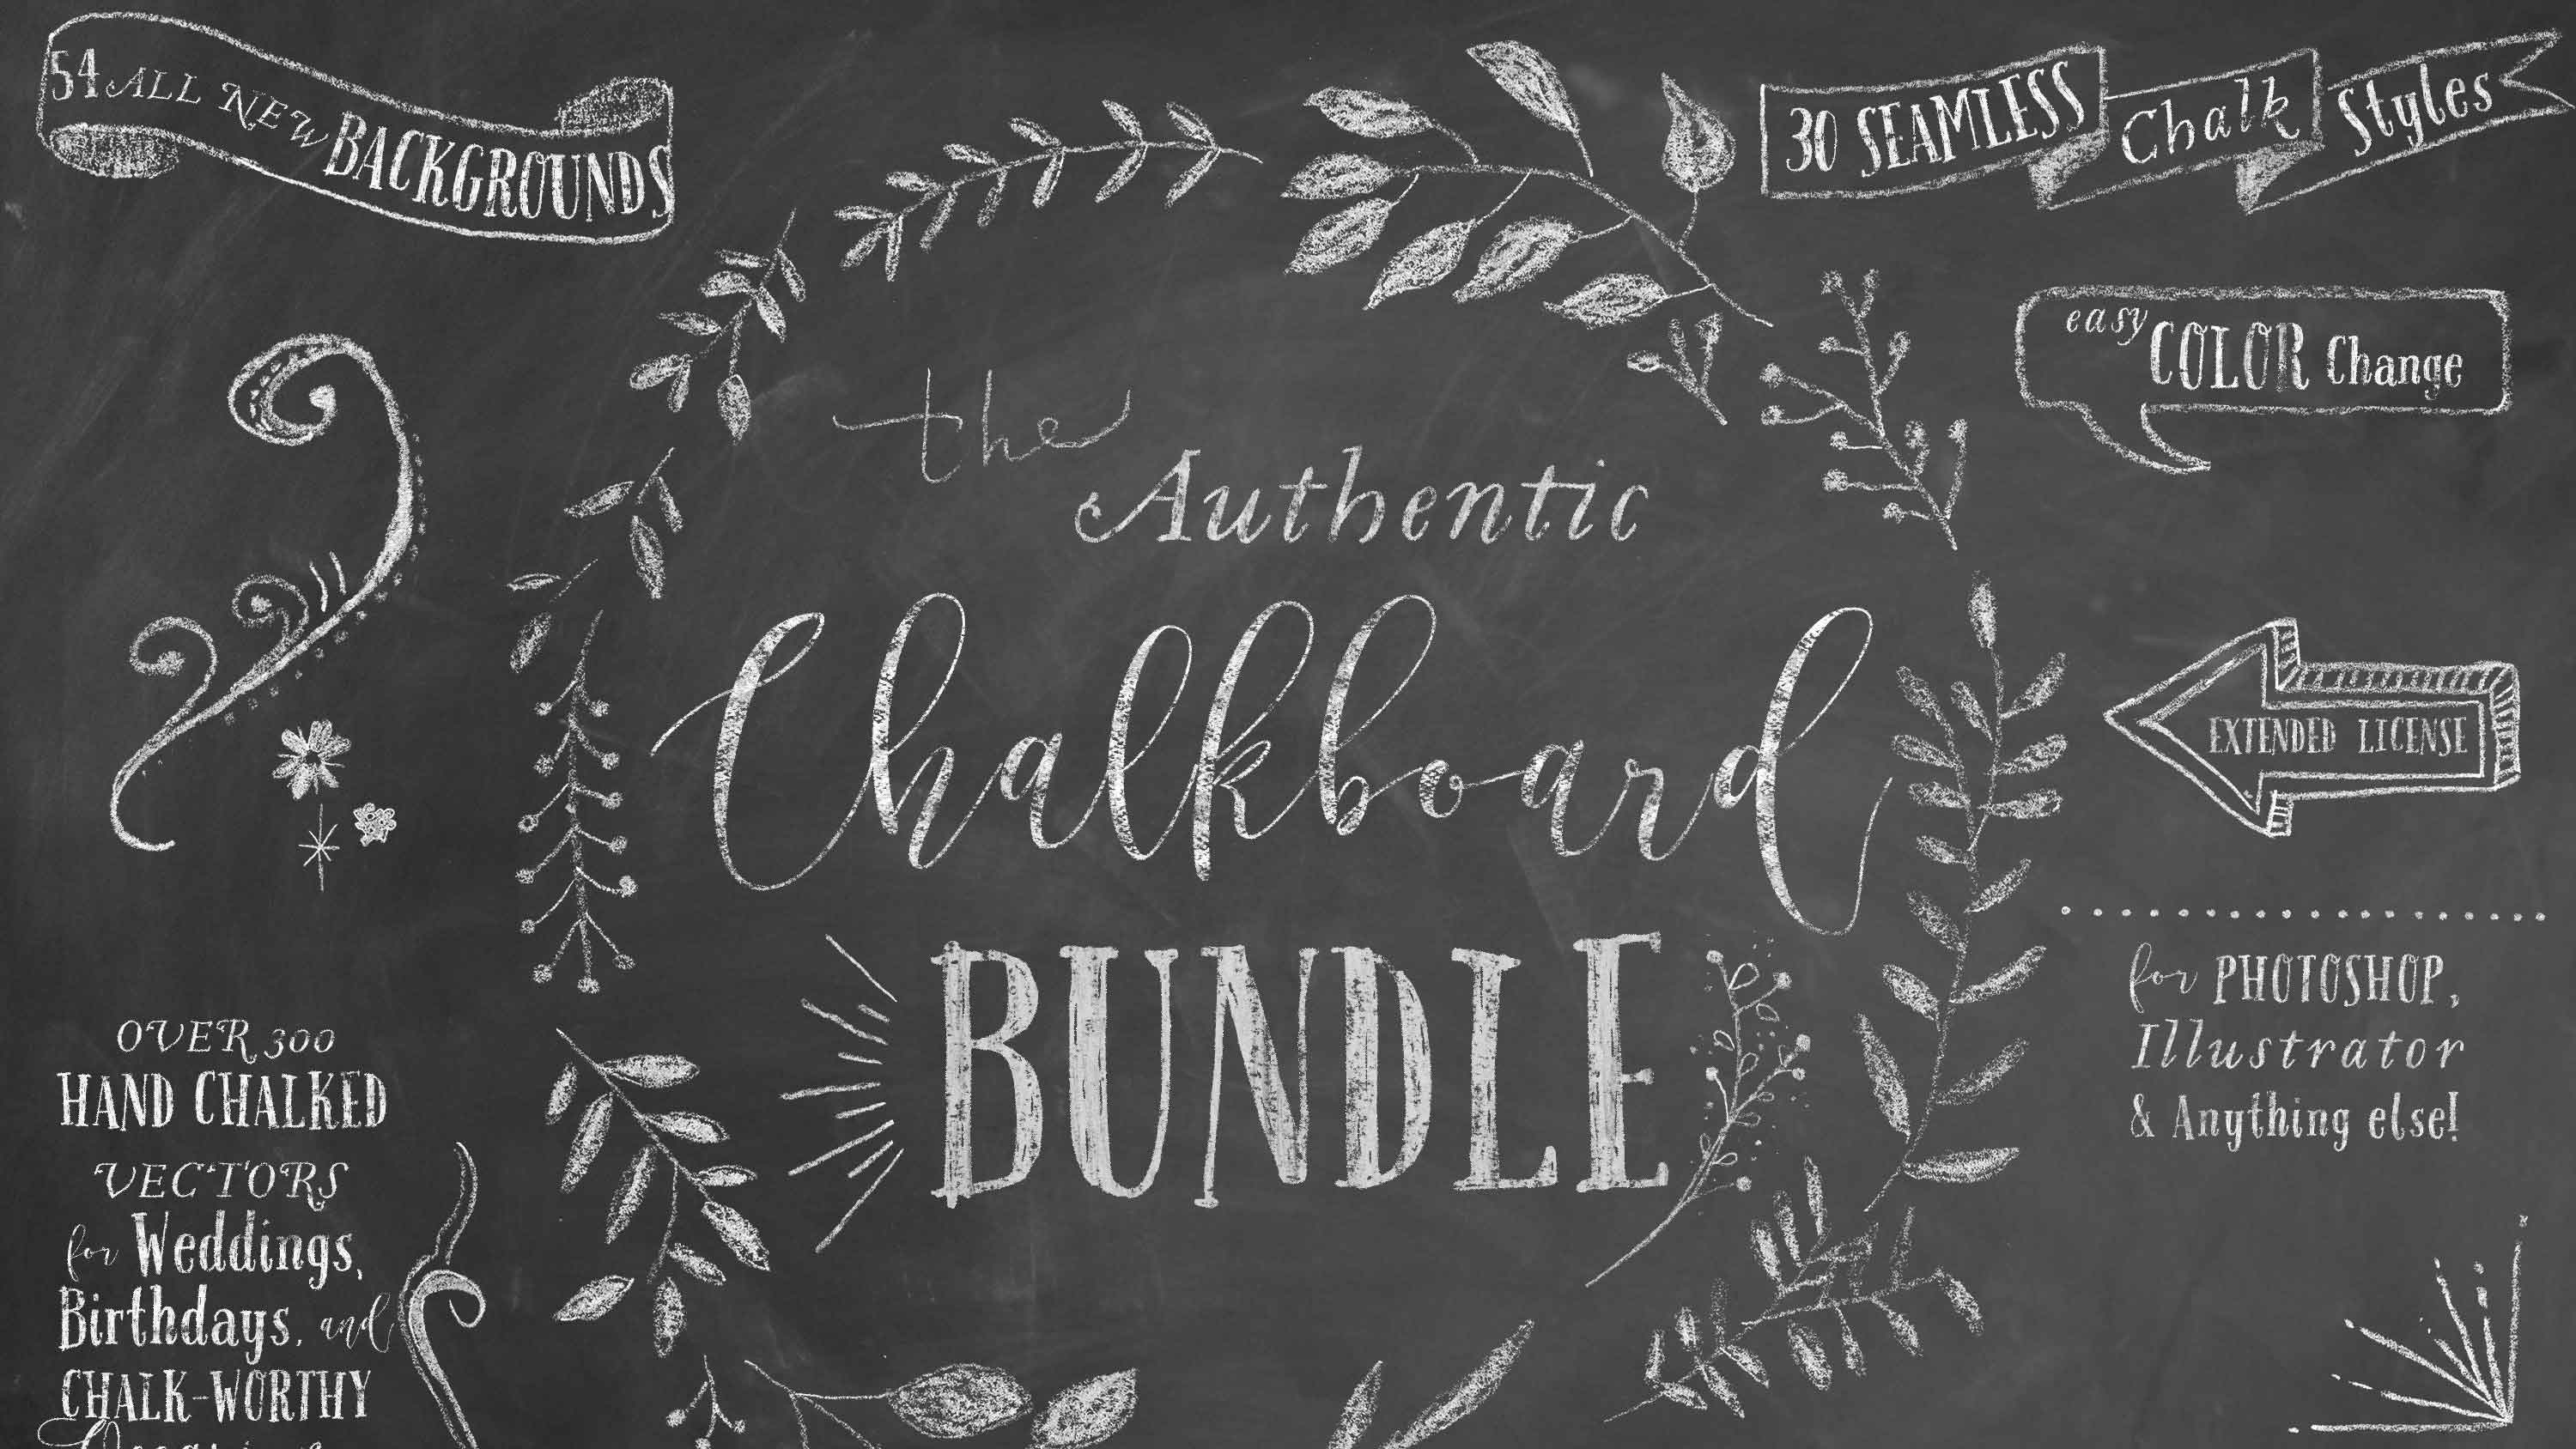 Best graphic design tools for May: chalkboard bunde